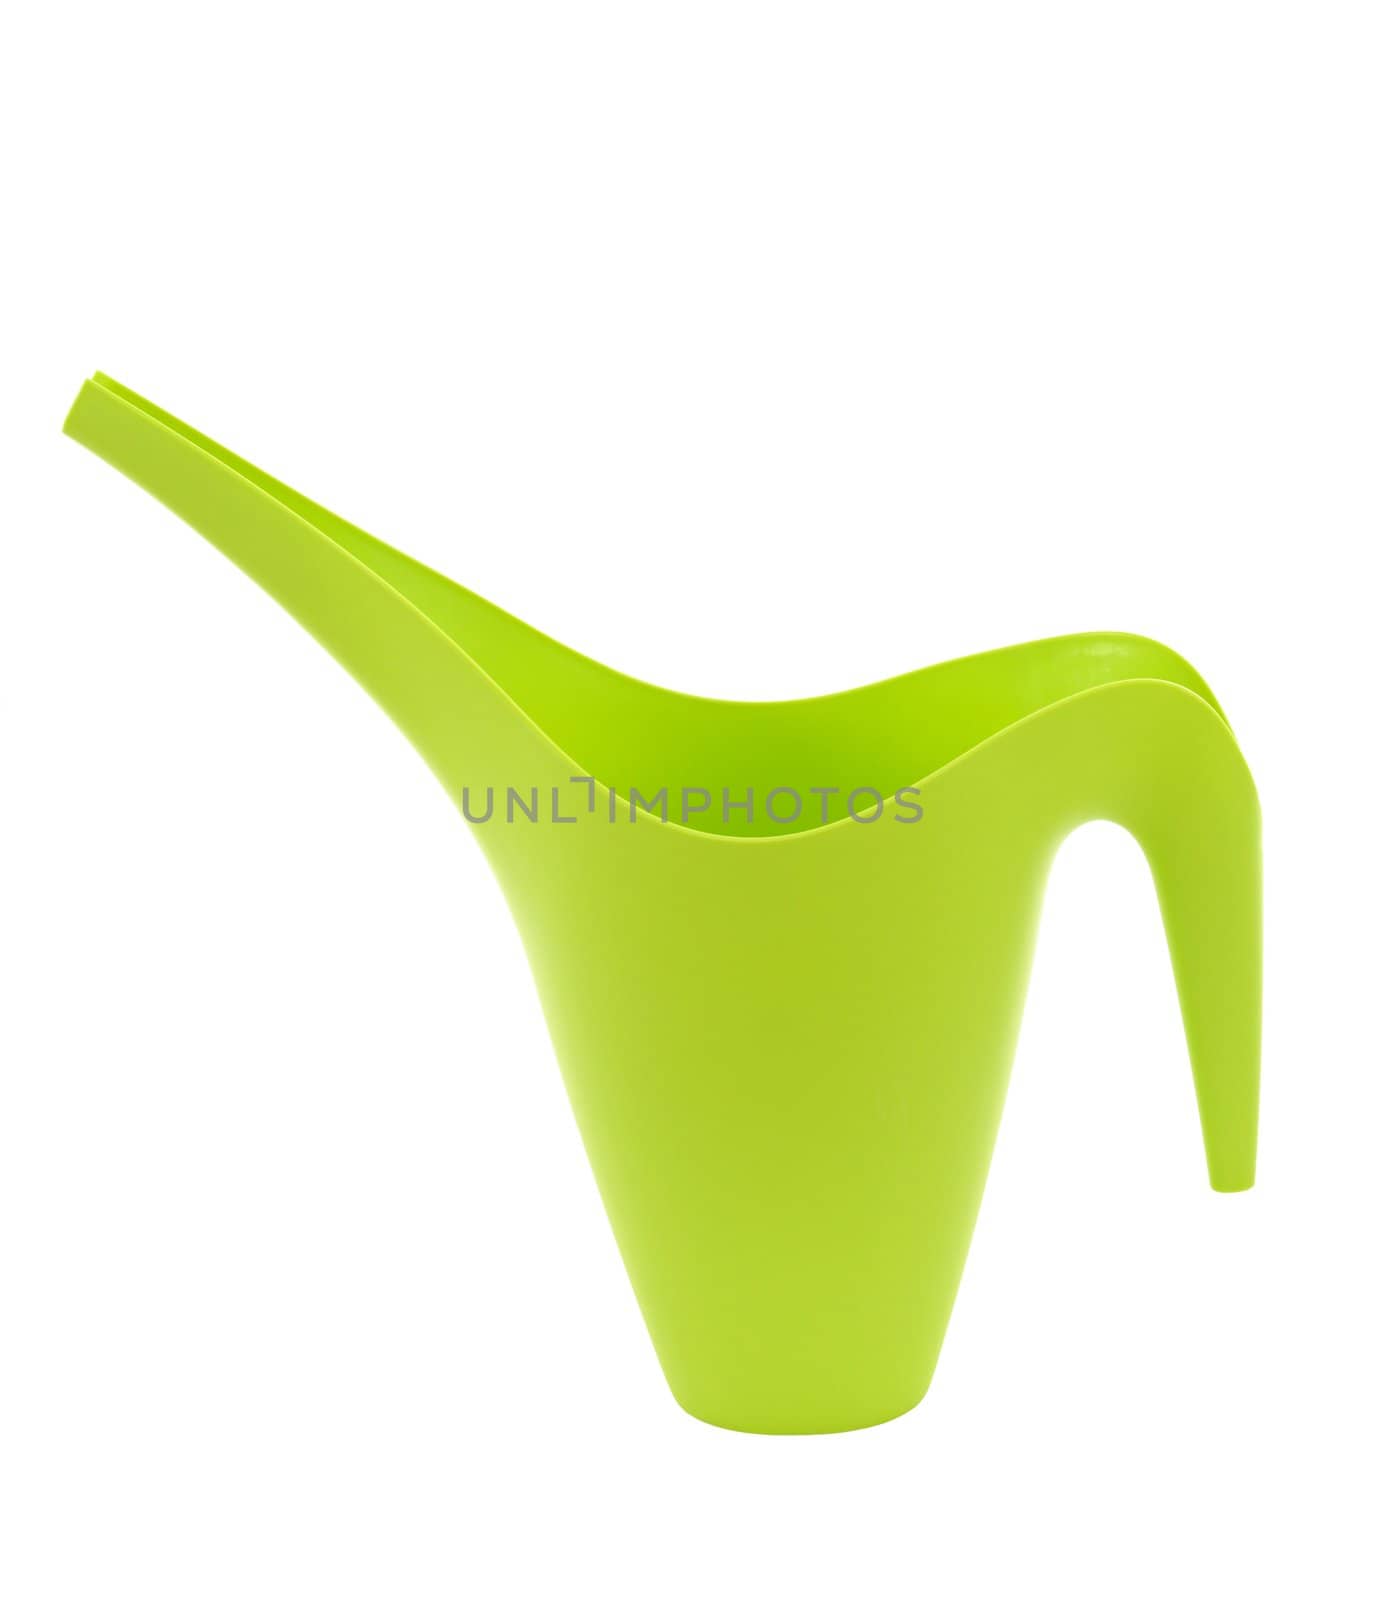 Stylish green watering can isolated on white.